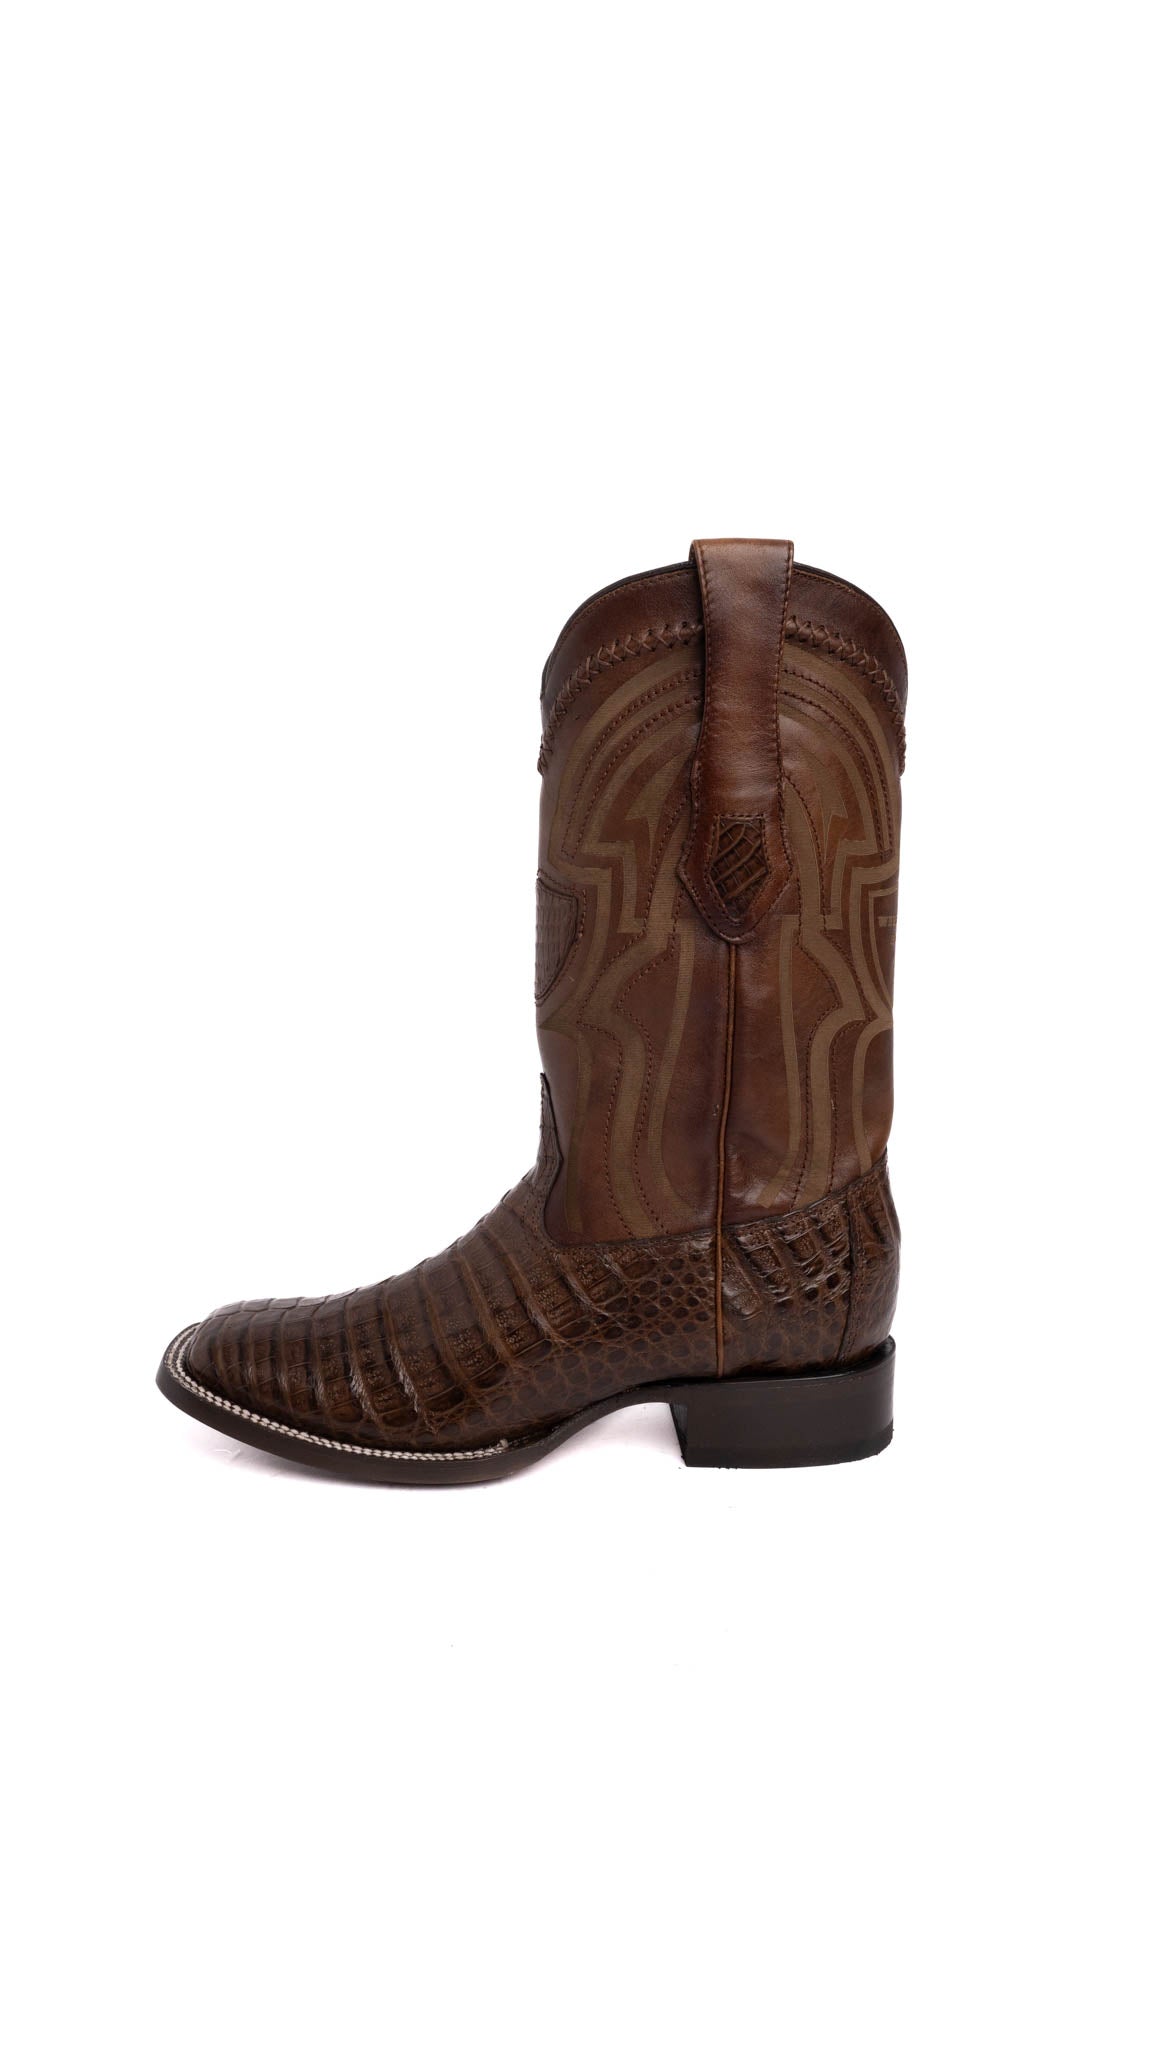 Caiman Belly Wild West Square Toe Cowboy Boot